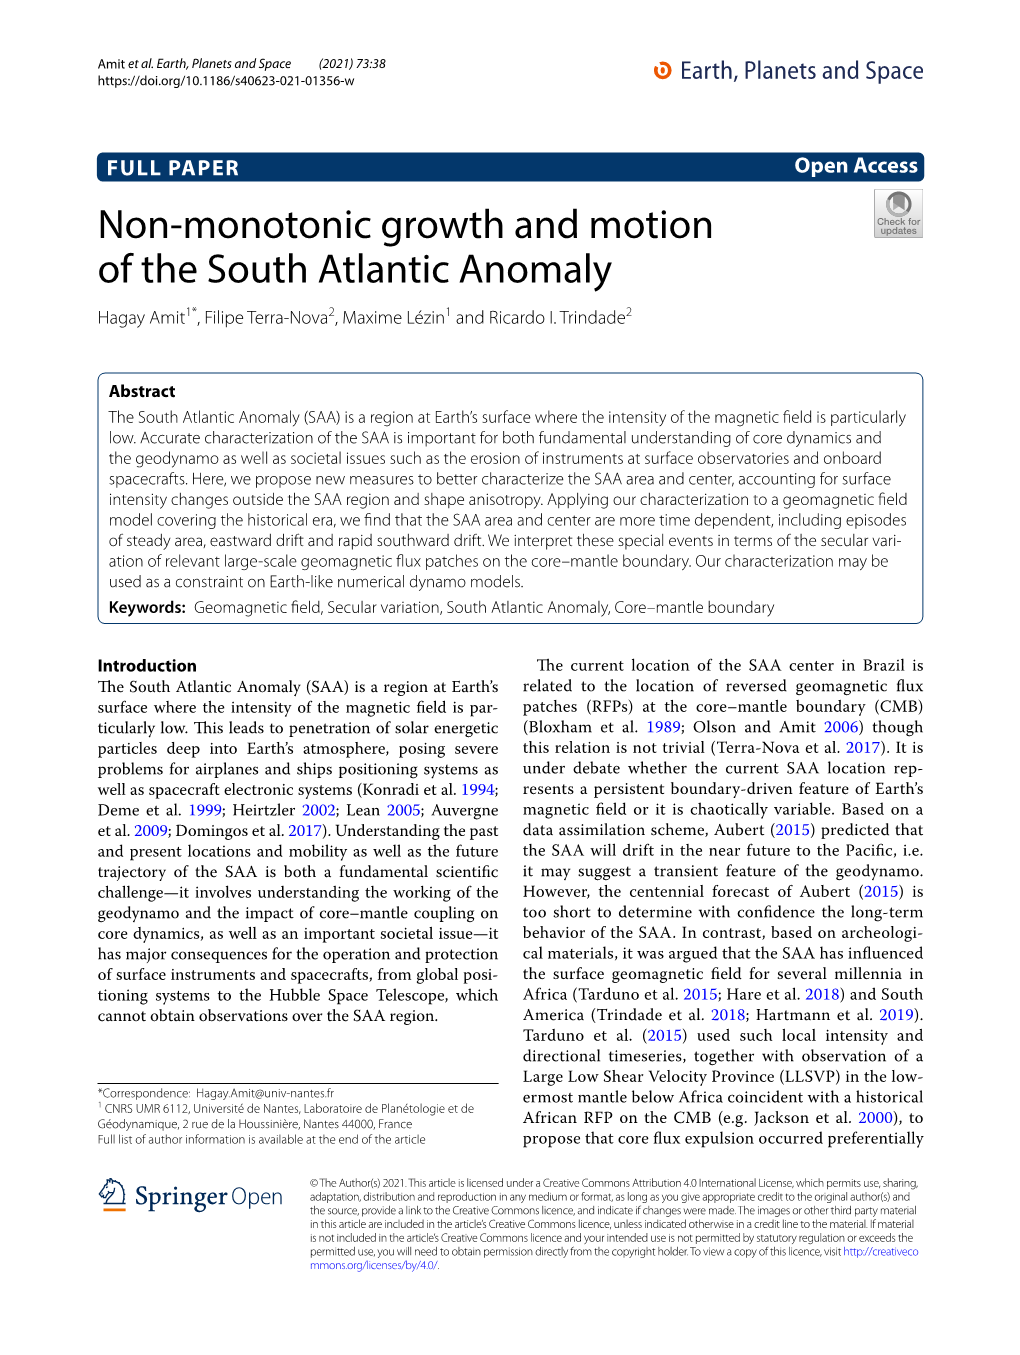 Non-Monotonic Growth and Motion of the South Atlantic Anomaly